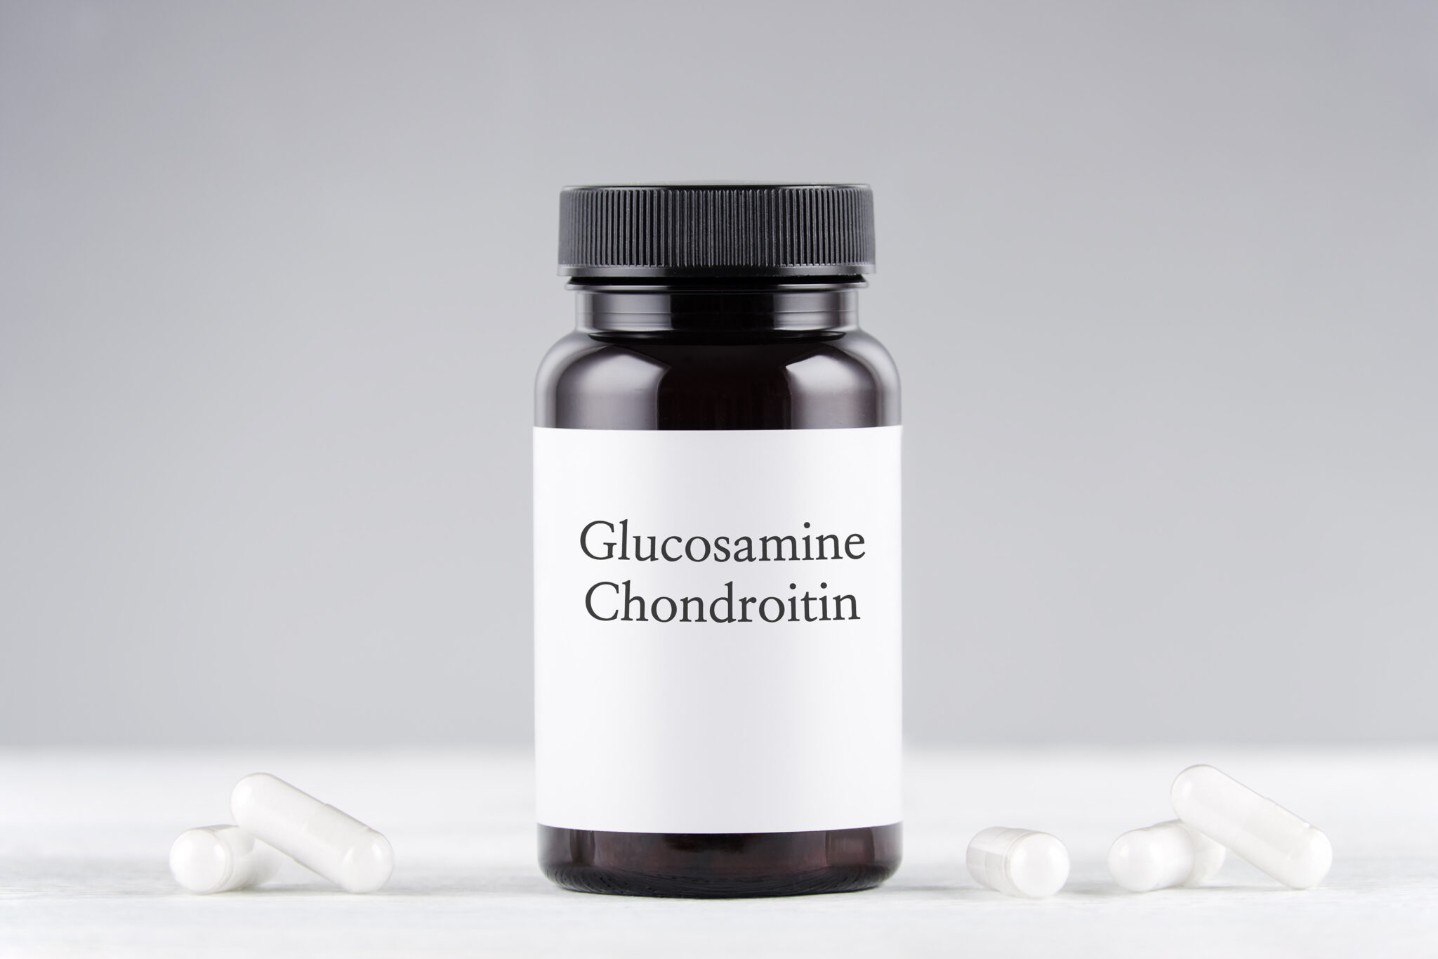 nutritional supplement glucosamine and chondroitin bottle and capsules on gray